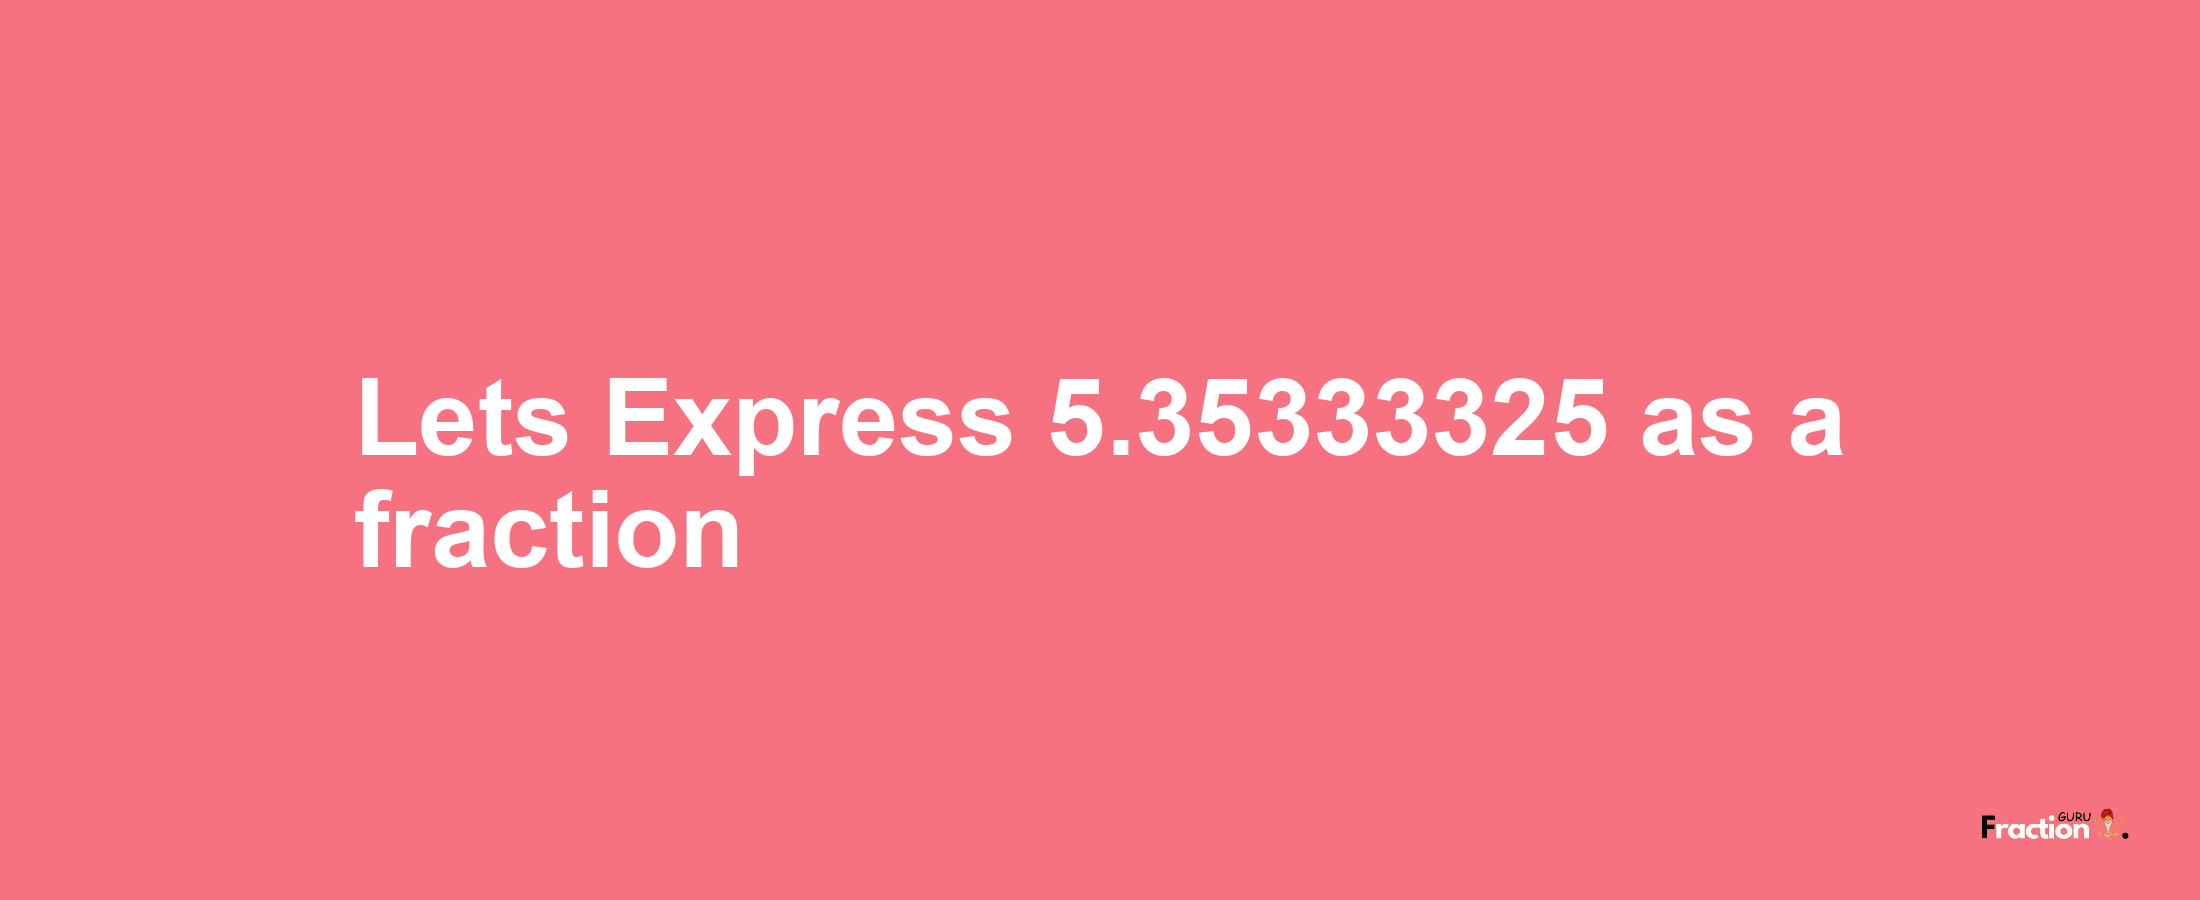 Lets Express 5.35333325 as afraction